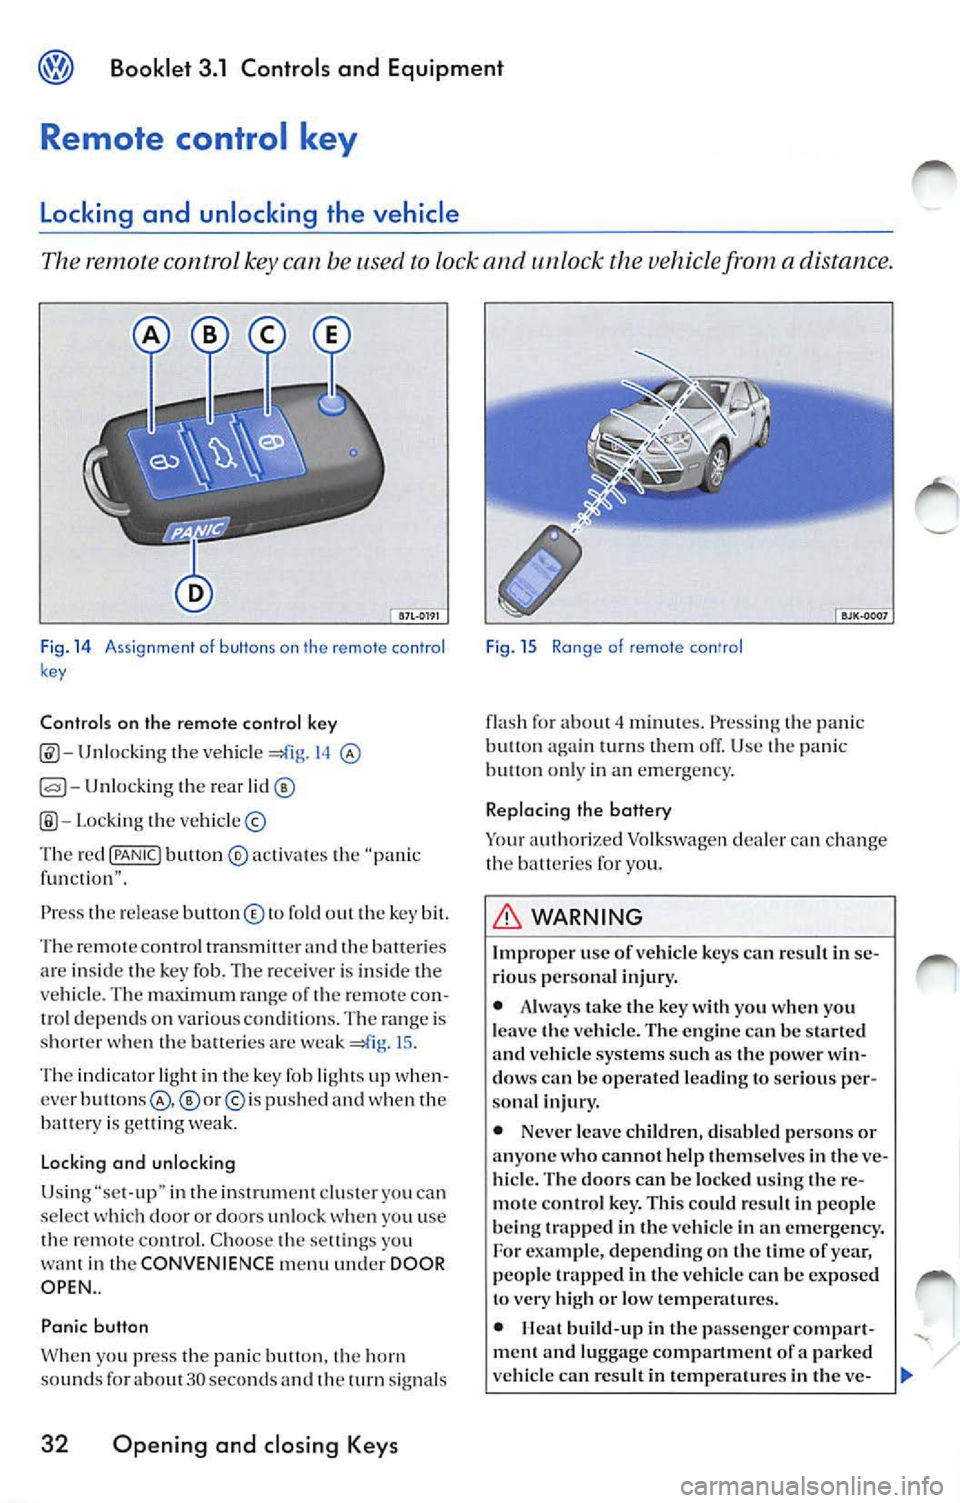 VOLKSWAGEN JETTA 2007  Owners Manual Booklet  3.1  Controls  and  Equipment 
Remote  control  key 
Locking  and  unlocking  the  vehicle 
The remote  control  key can  be used to lock and  unlock  the  vehicle  from a distance. 
Fig. 14 